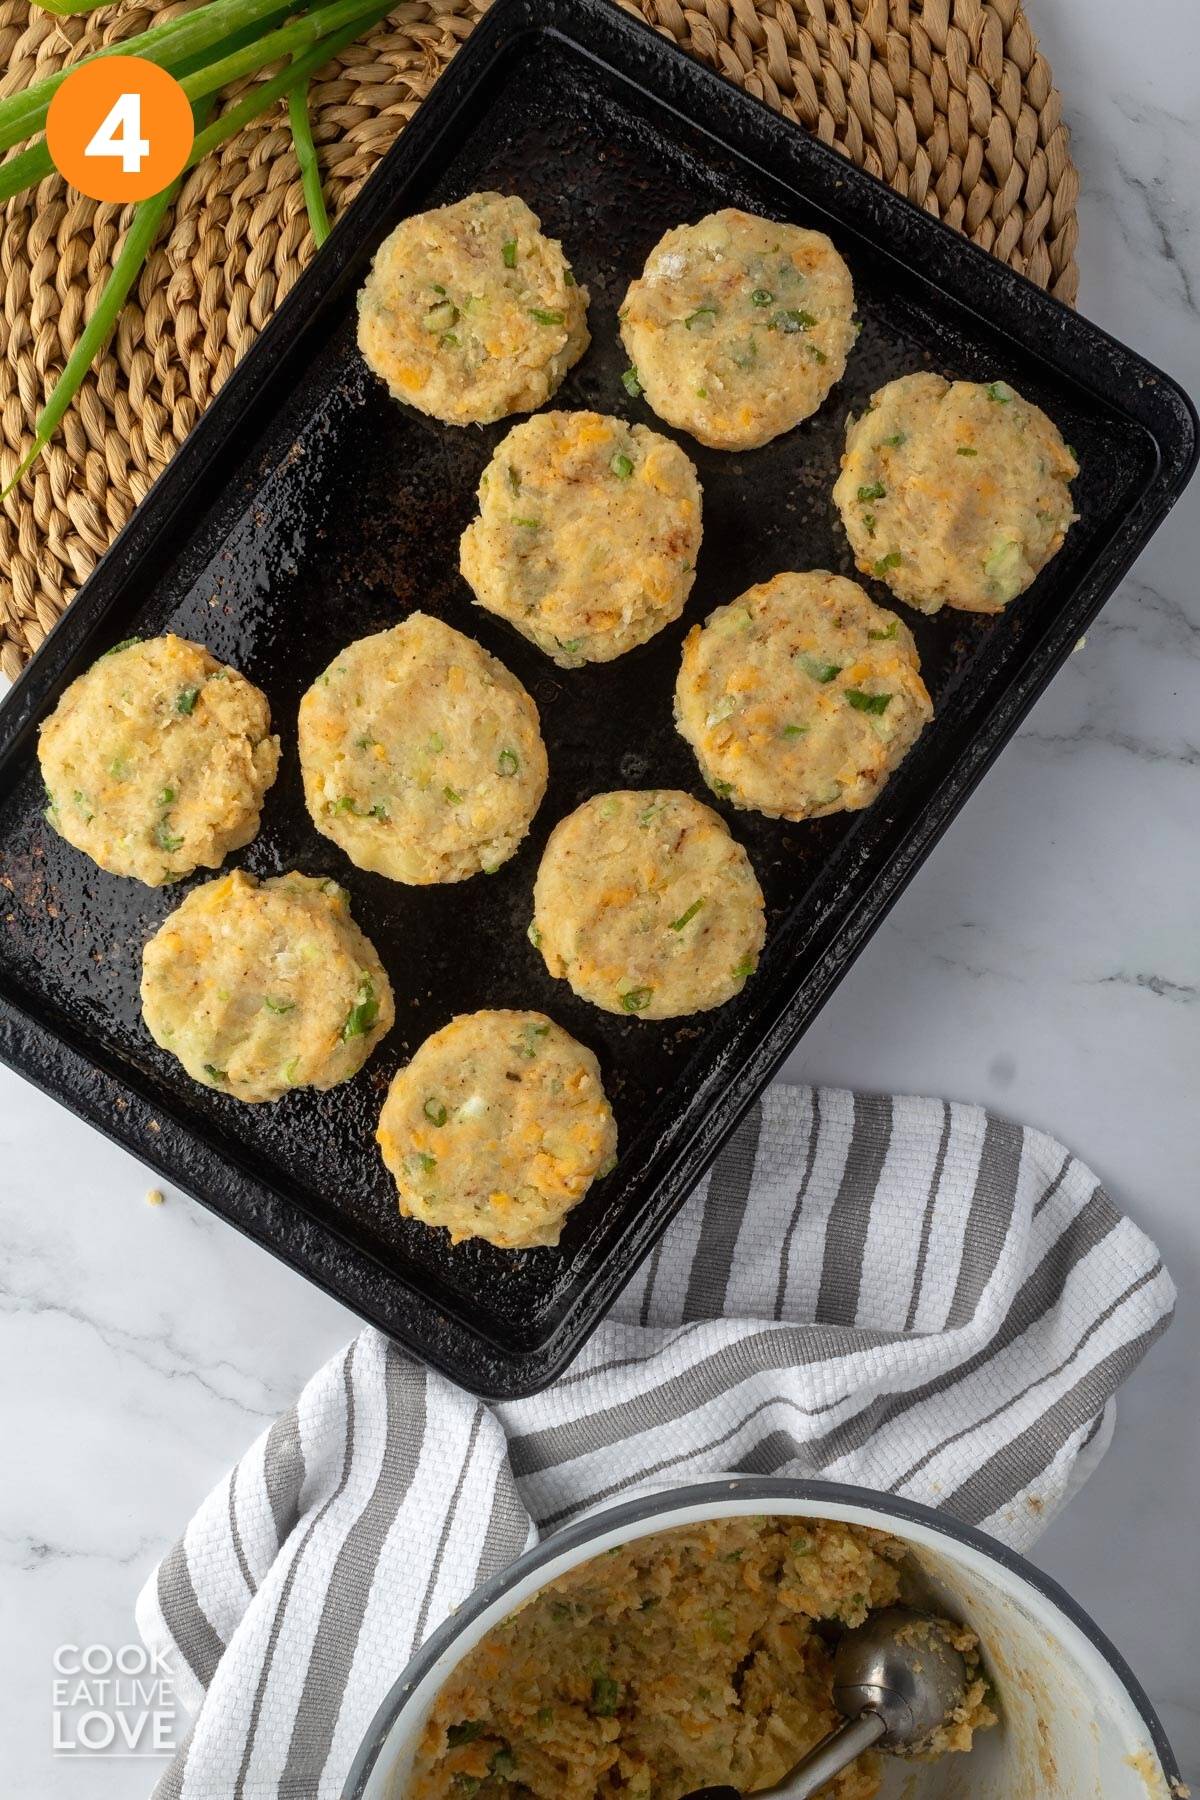 Uncooked formed patties on a black baking sheet.